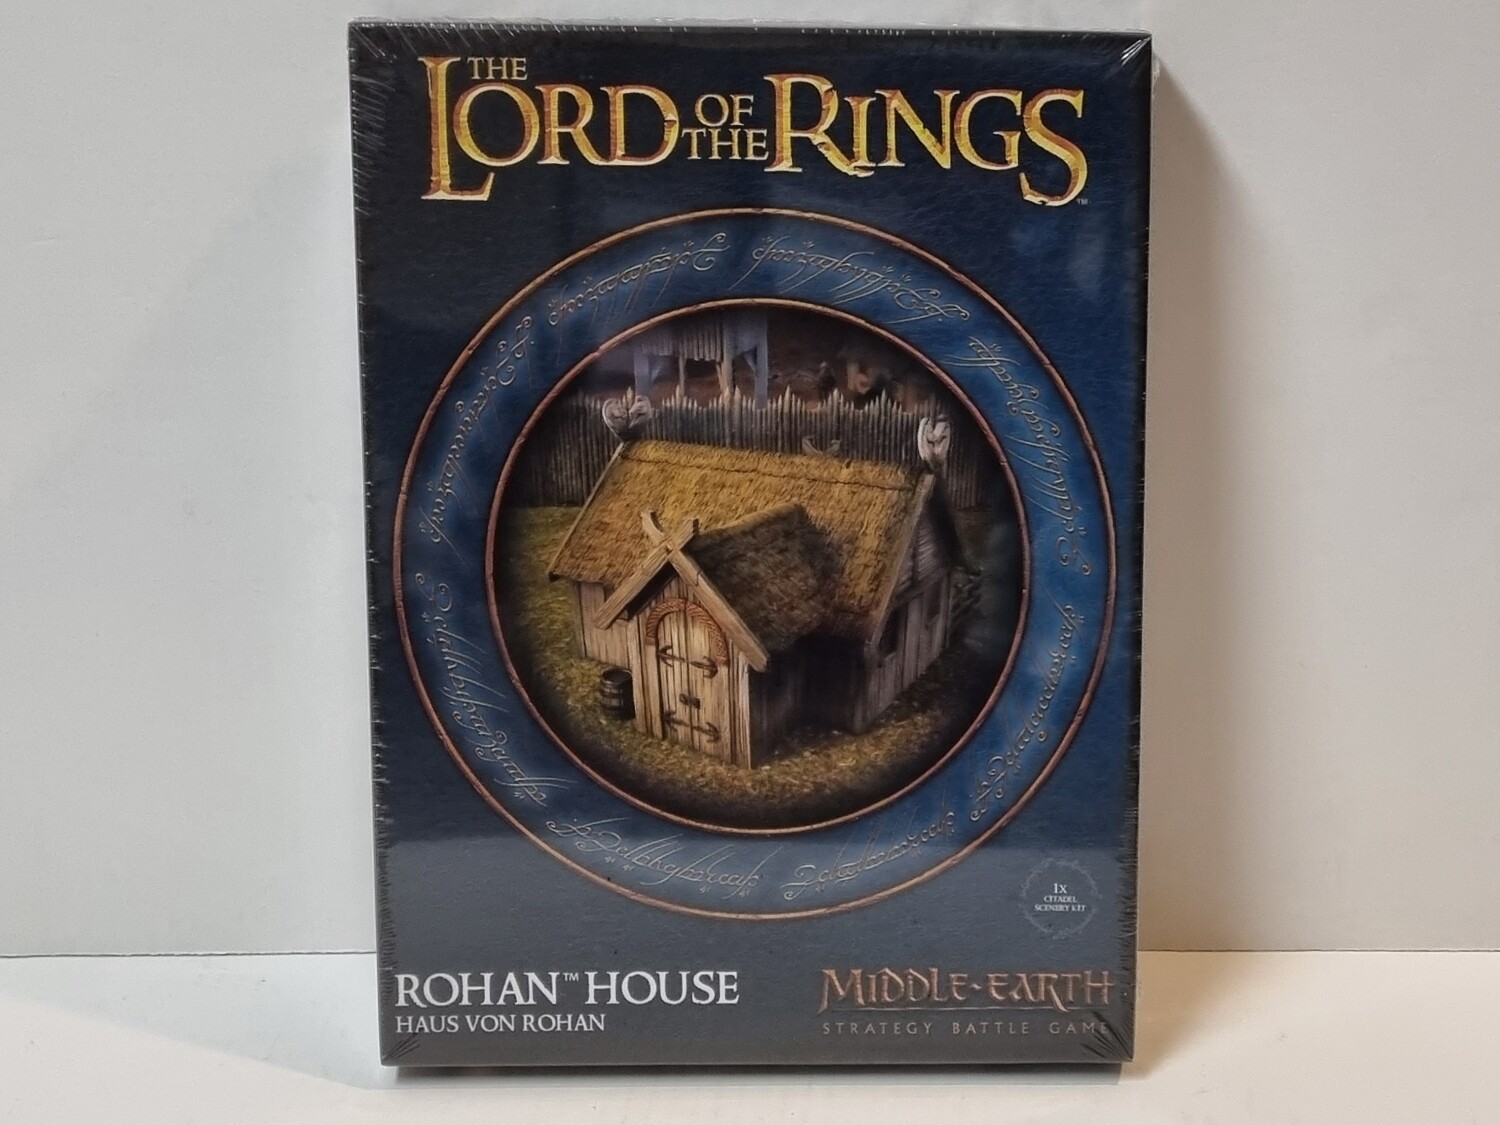 Middle-Earth, 30-47, Rohan house, House of Rohan, The Lord of the Rings